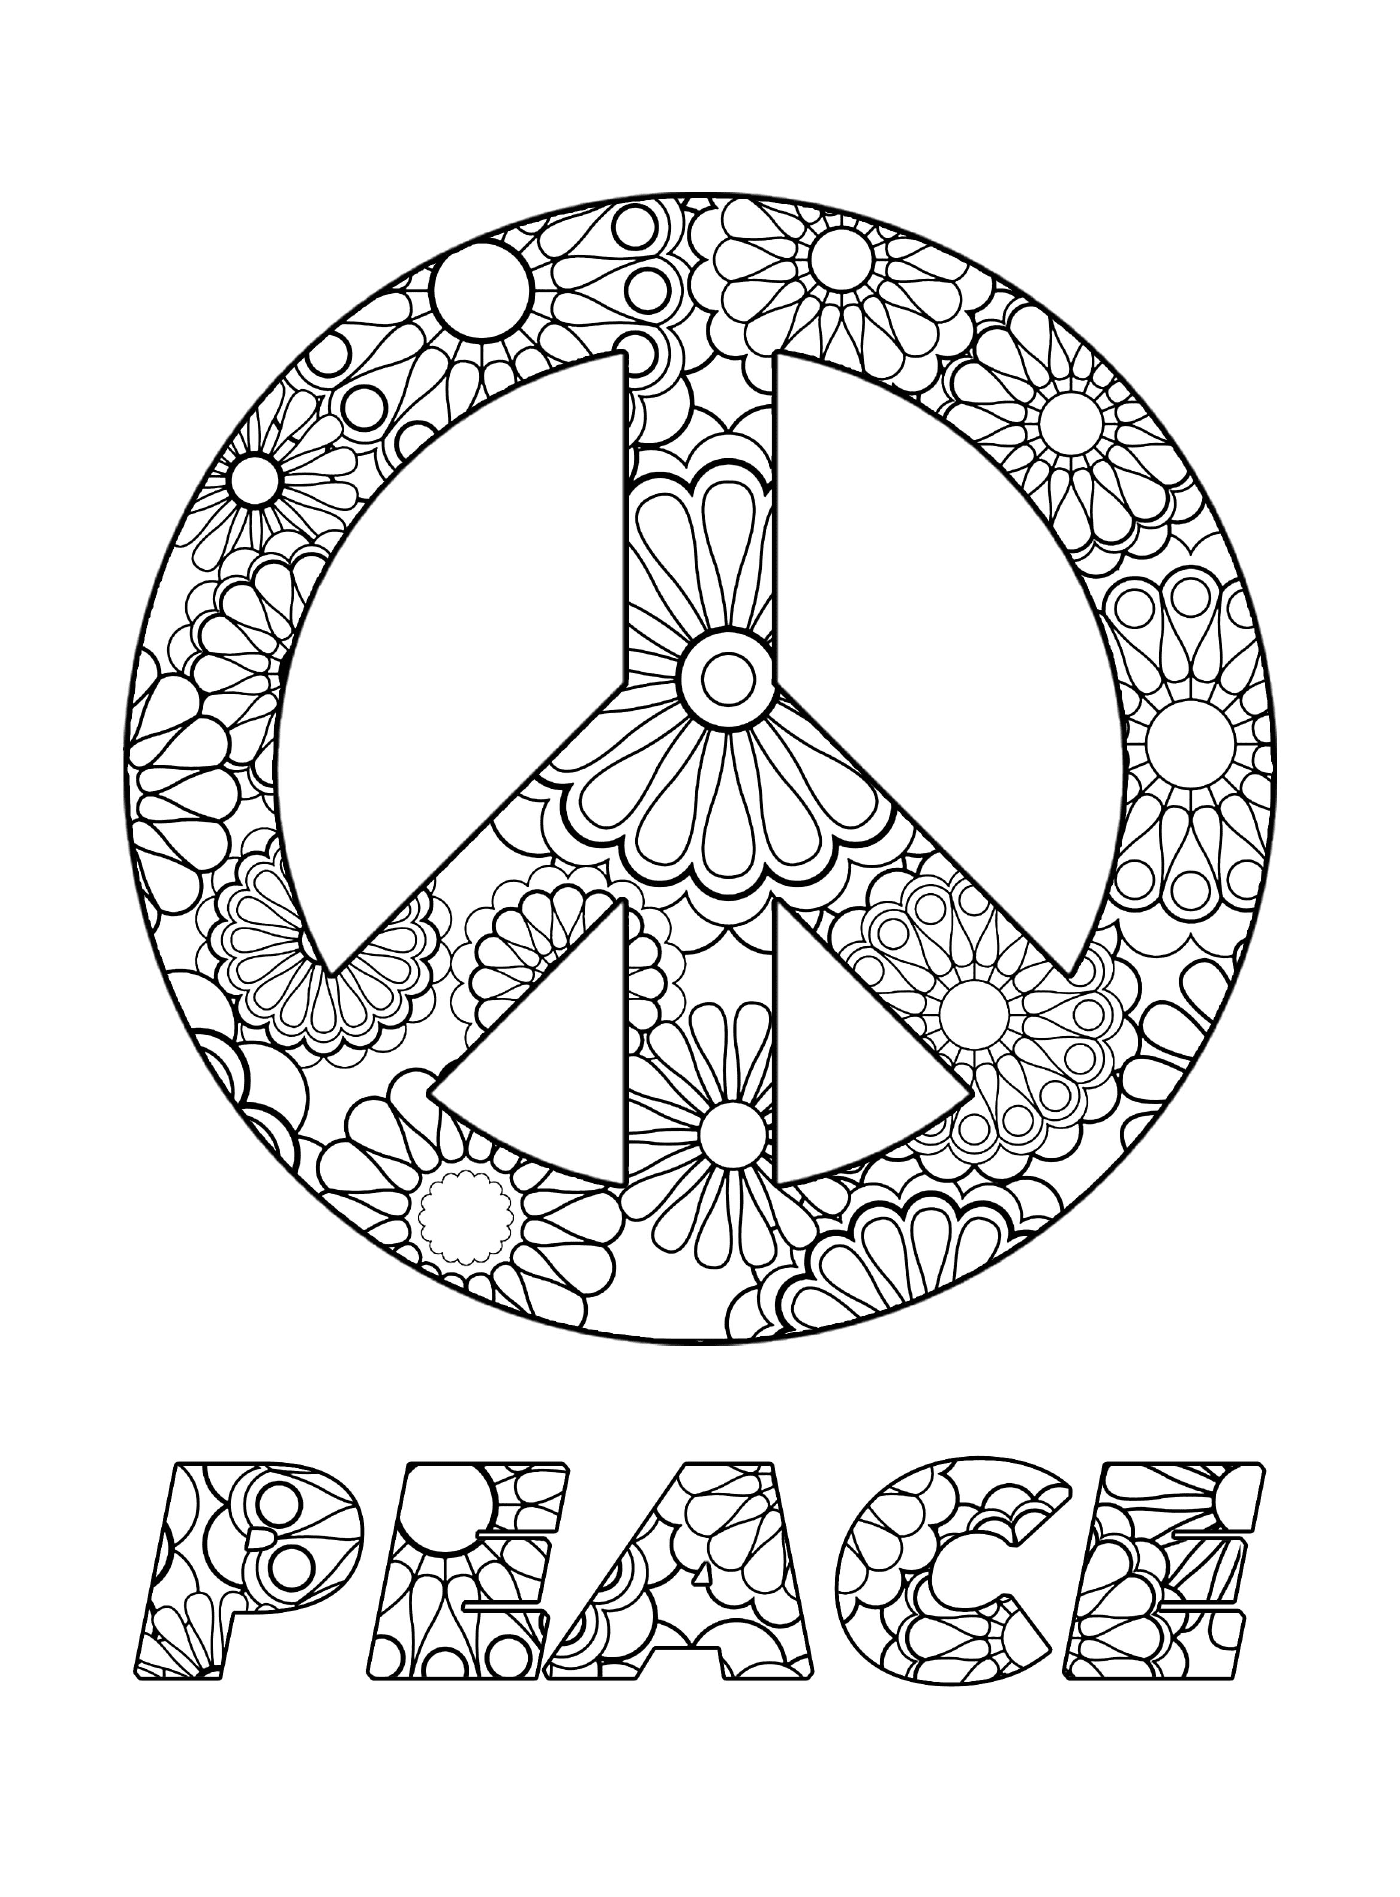  Peace symbol with flowers 